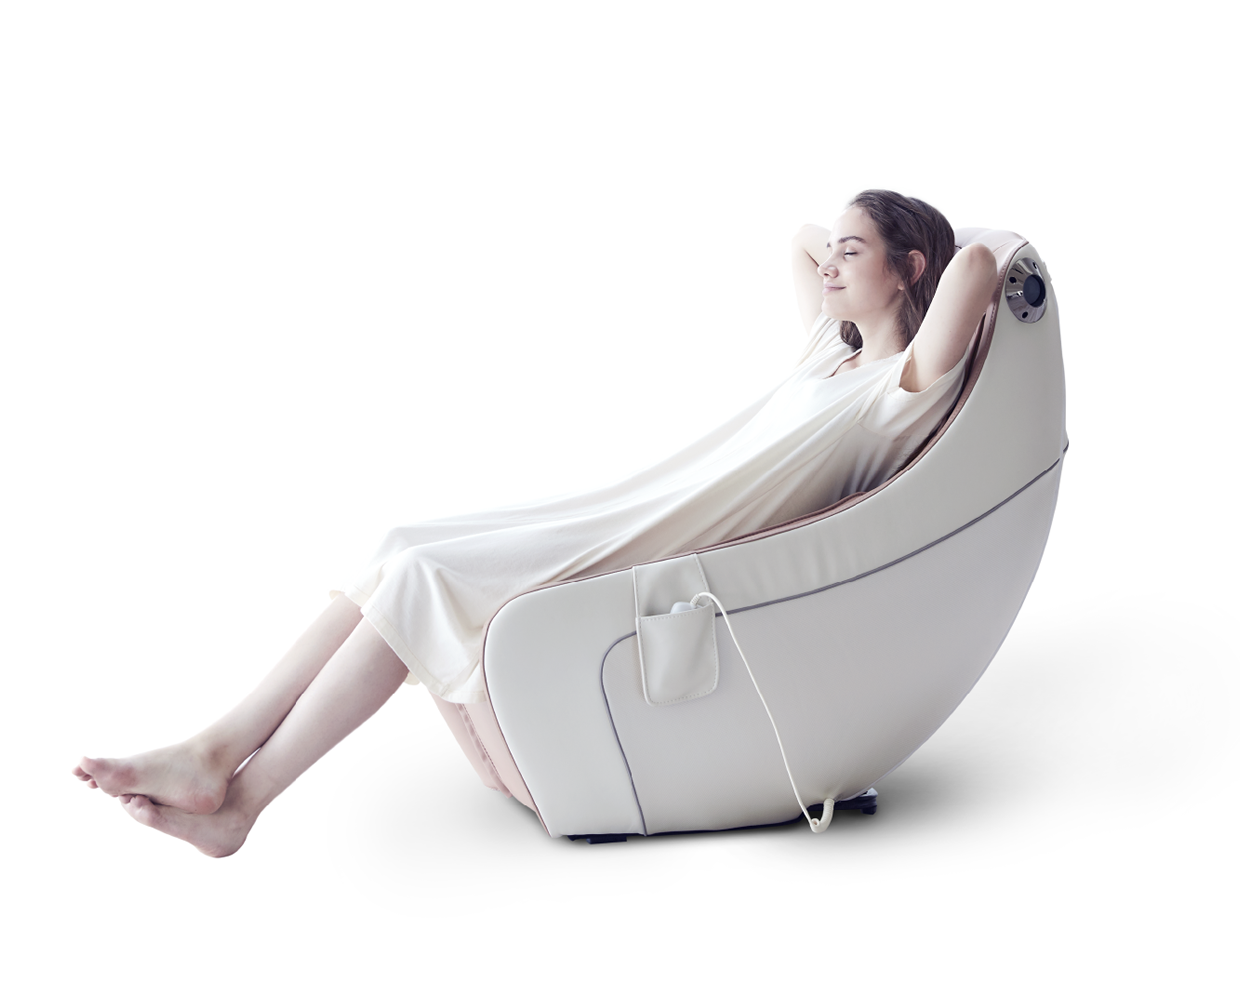 SYNCA COMPACT CHAIR | MR320 MASSAGE